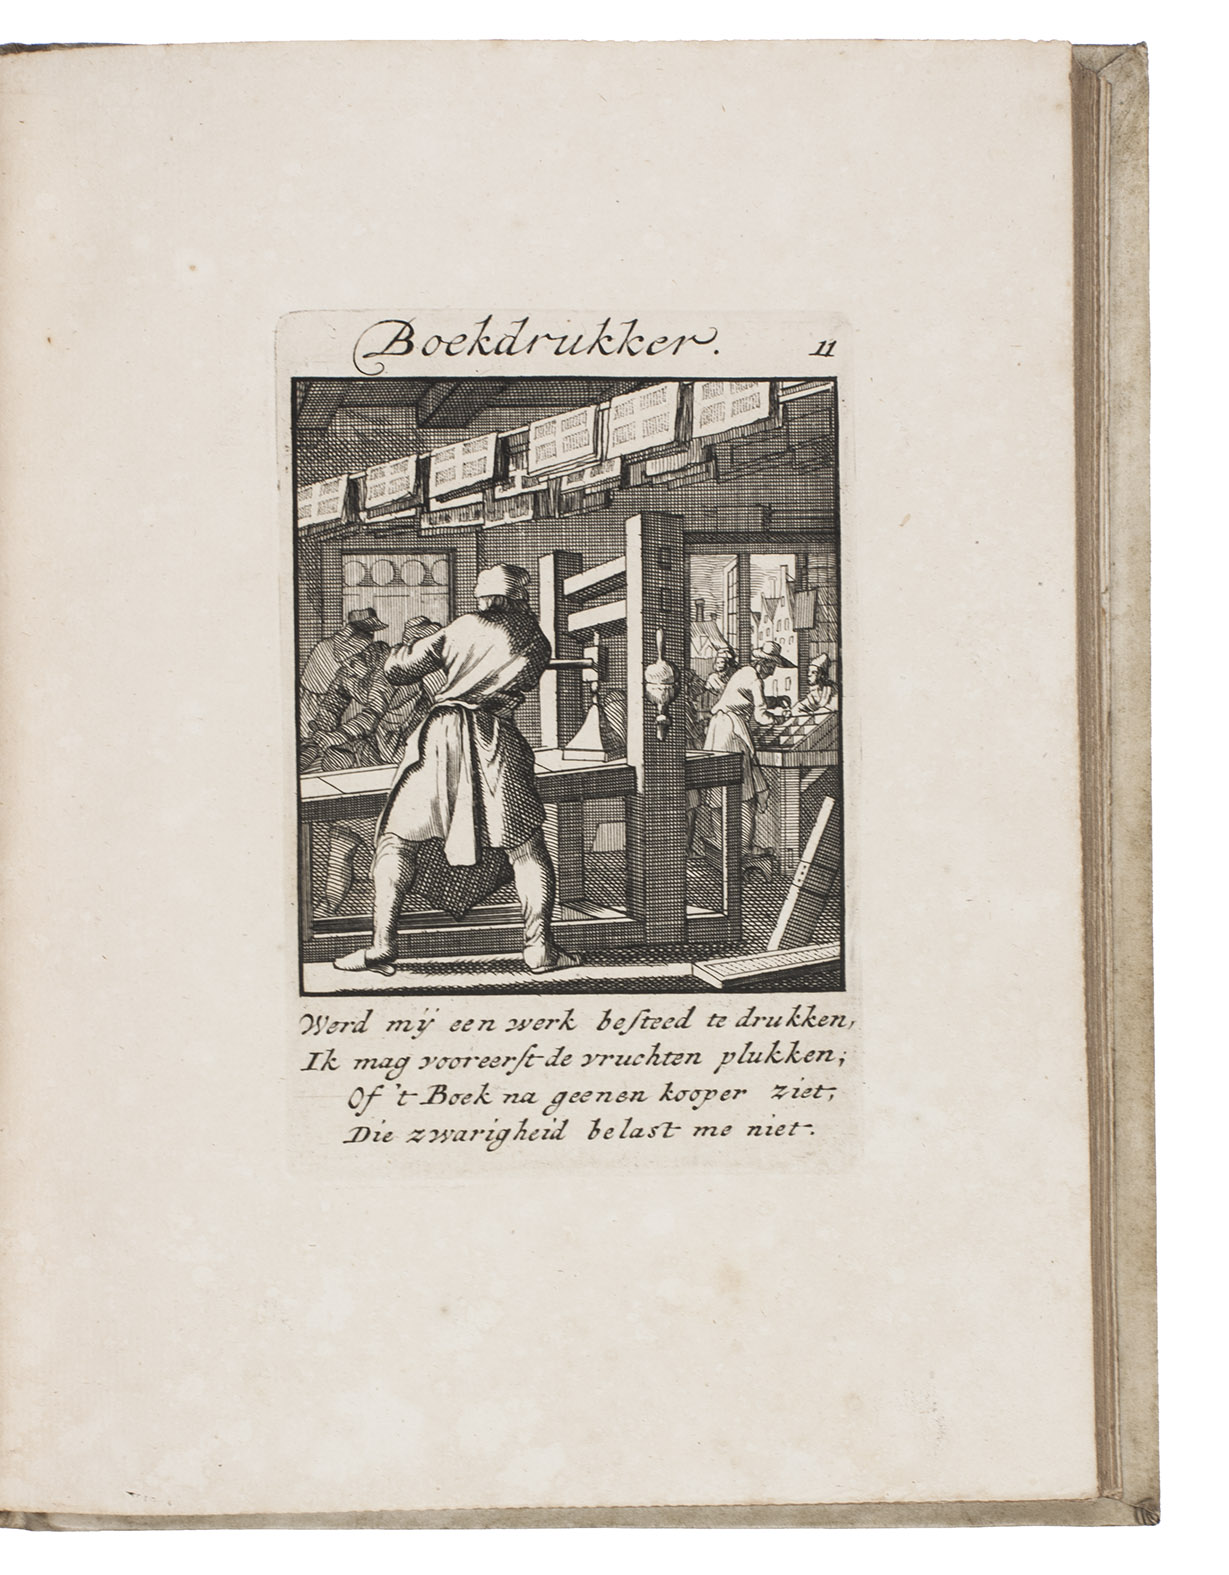 LUYKEN, Jan & Caspar and Anthony JANSSEN van ter GOES. - Afbeelding der menschelyke bezigheden, bestaande in hondert onderscheiden printverbeeldingen. Amsterdam, Reinier & Josua Ottens, [ca. 1726/50]. 4to. With richly engraved emblematic frontispiece, engraved publisher's device on title-page, and 100 numbered engraved plates (plate size ca. 12 x 8 cm) of trades and professions, engraved after the designs by Jan and Caspar Luyken. Contemporary blind-tooled vellum, gilt and gauffered edges.